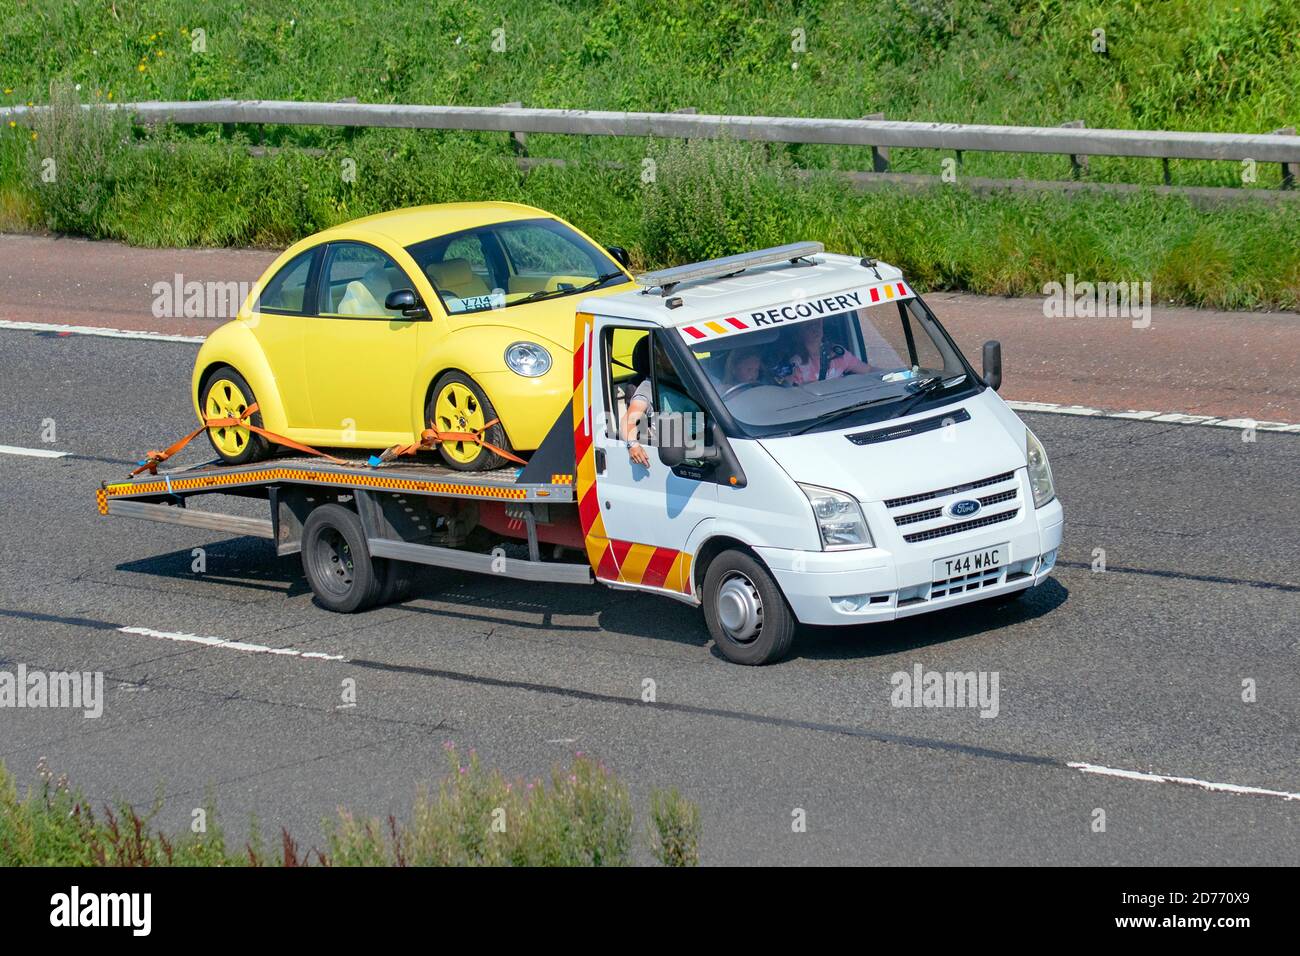 Yellow VW Volkswagen Beetle on car transporter 24 hr breakdown commercial breakdown recovery service;  Haulage delivery trucks, lorry, transportation, truck, cargo carrier, Ford 90 T30 vehicle, European commercial transport, industry, M6 at Manchester, UK Stock Photo